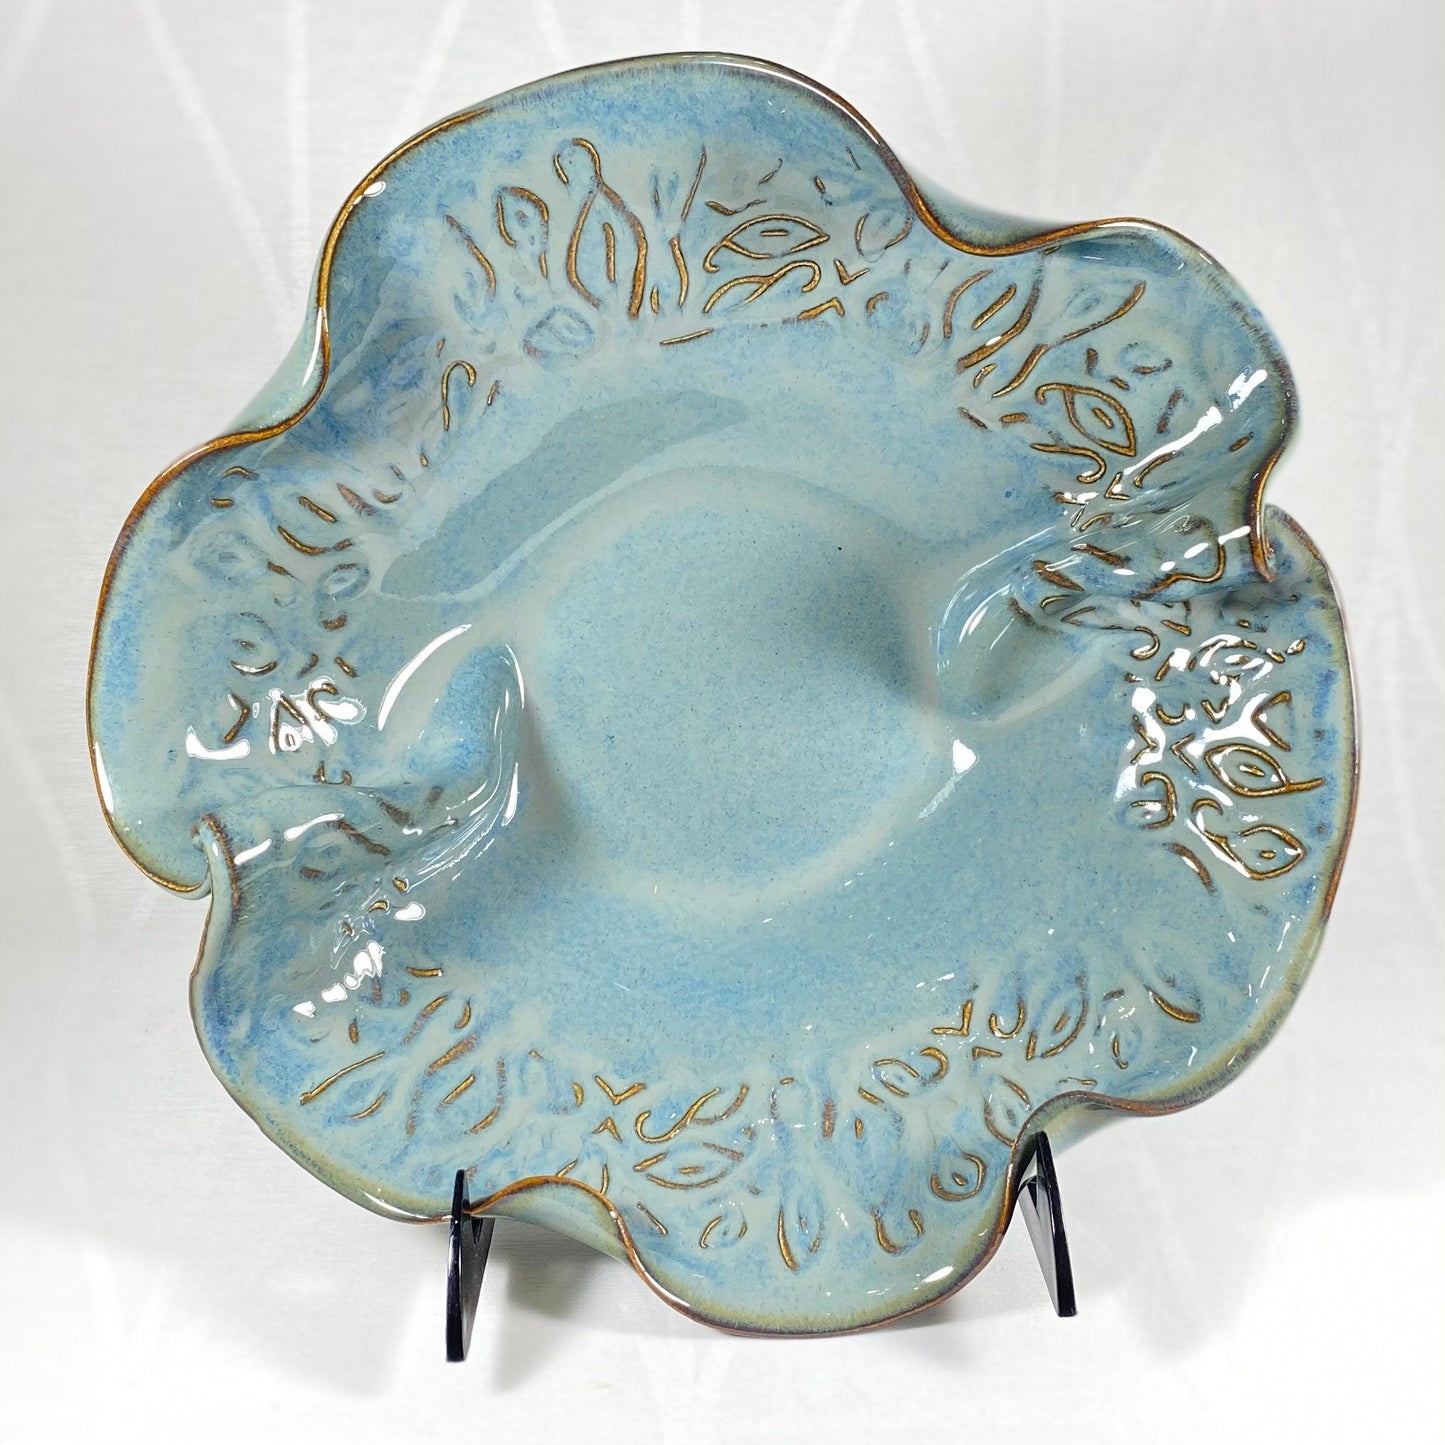 Handmade Light Blue Bowl with Serving Spoons, Functional and Decorative Pottery